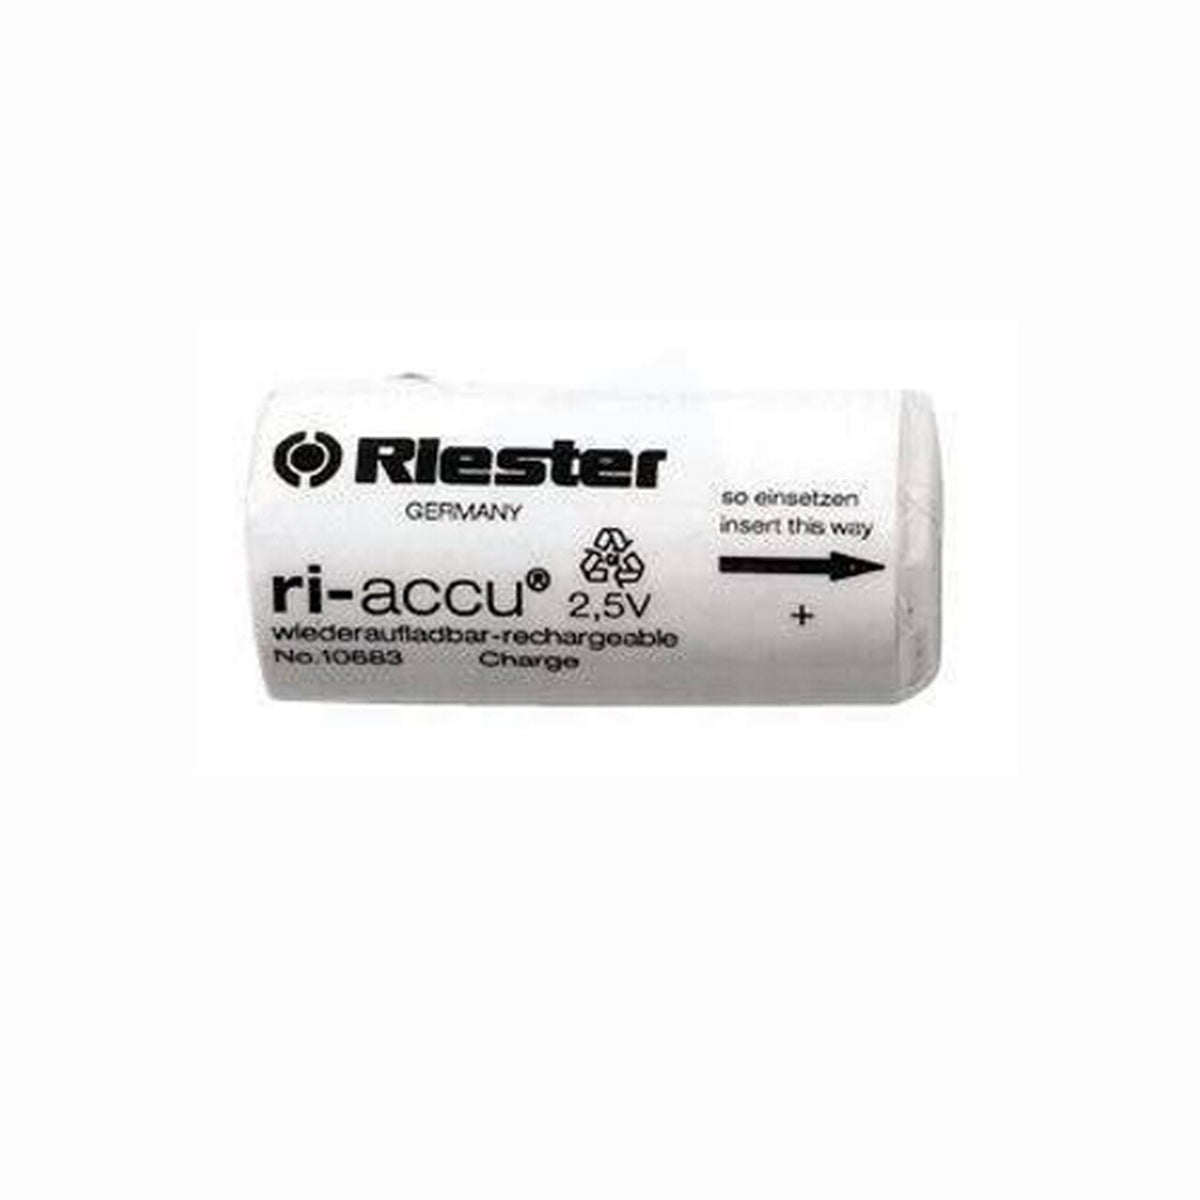 Riester Ri-Accu 2.5 V NiMH Battery for Plug-In-Style Handles